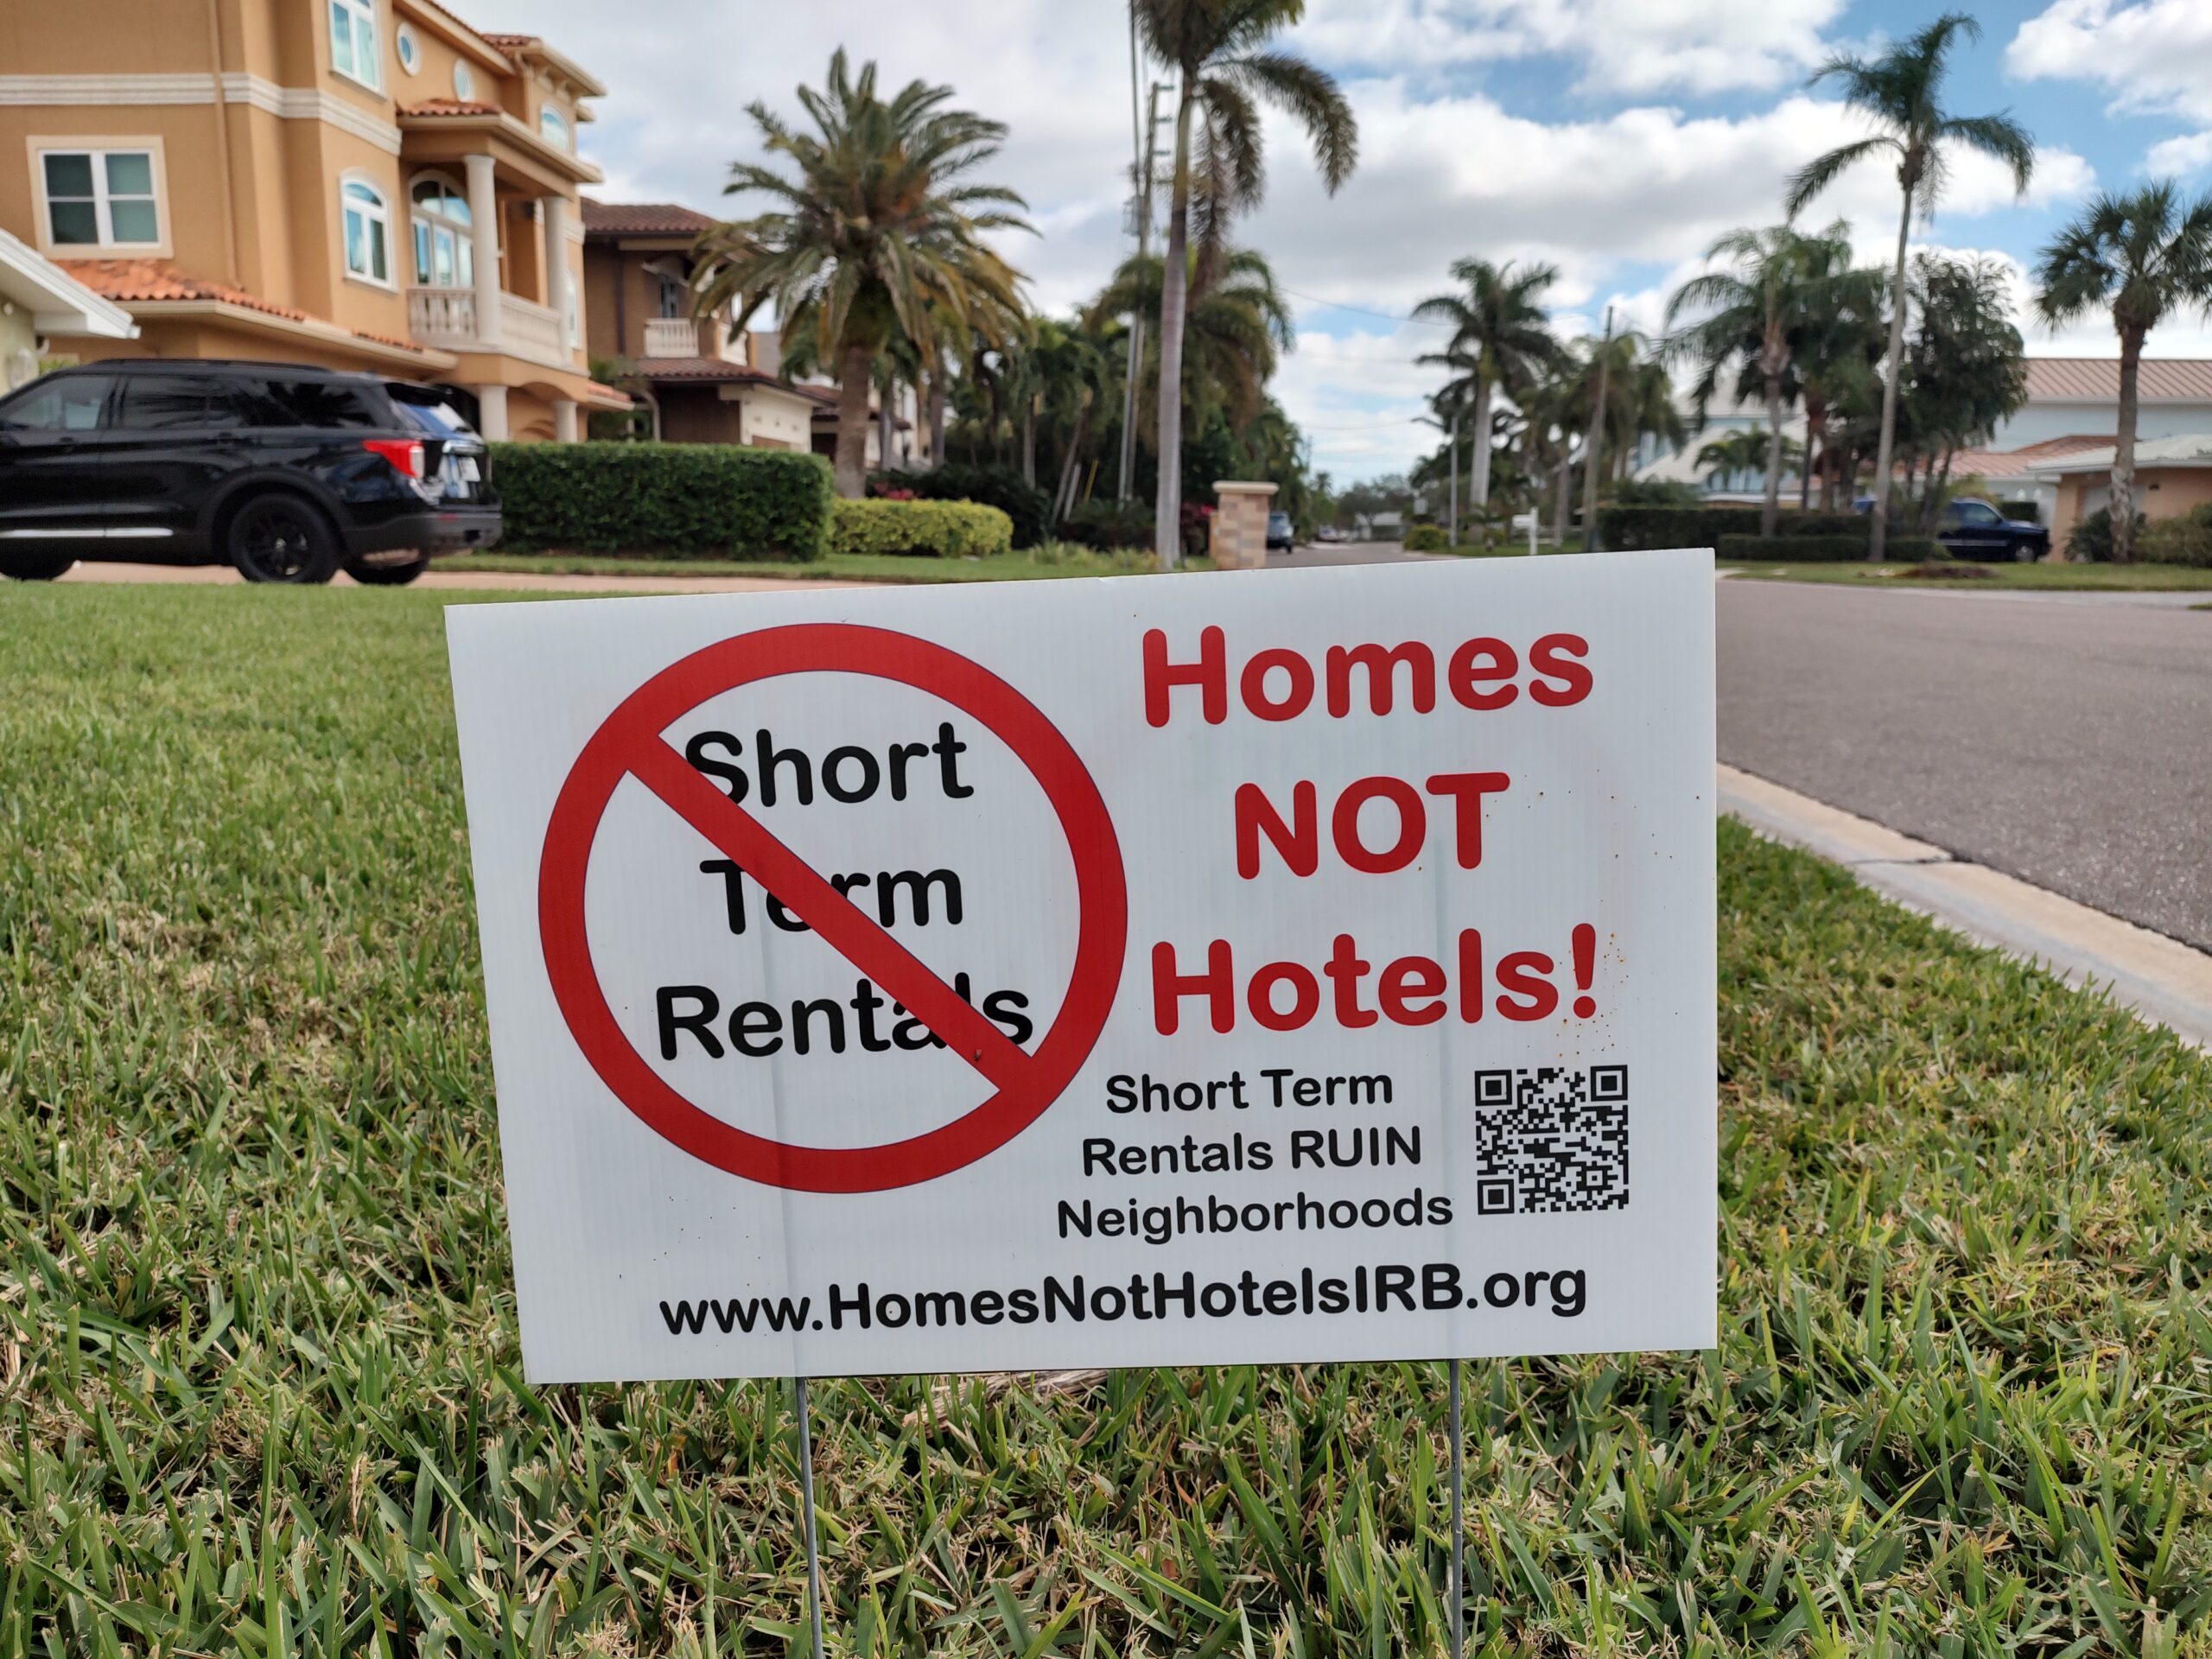 Senator wants uniform standards for short-term vacation rentals, but it seems to be a tough sell